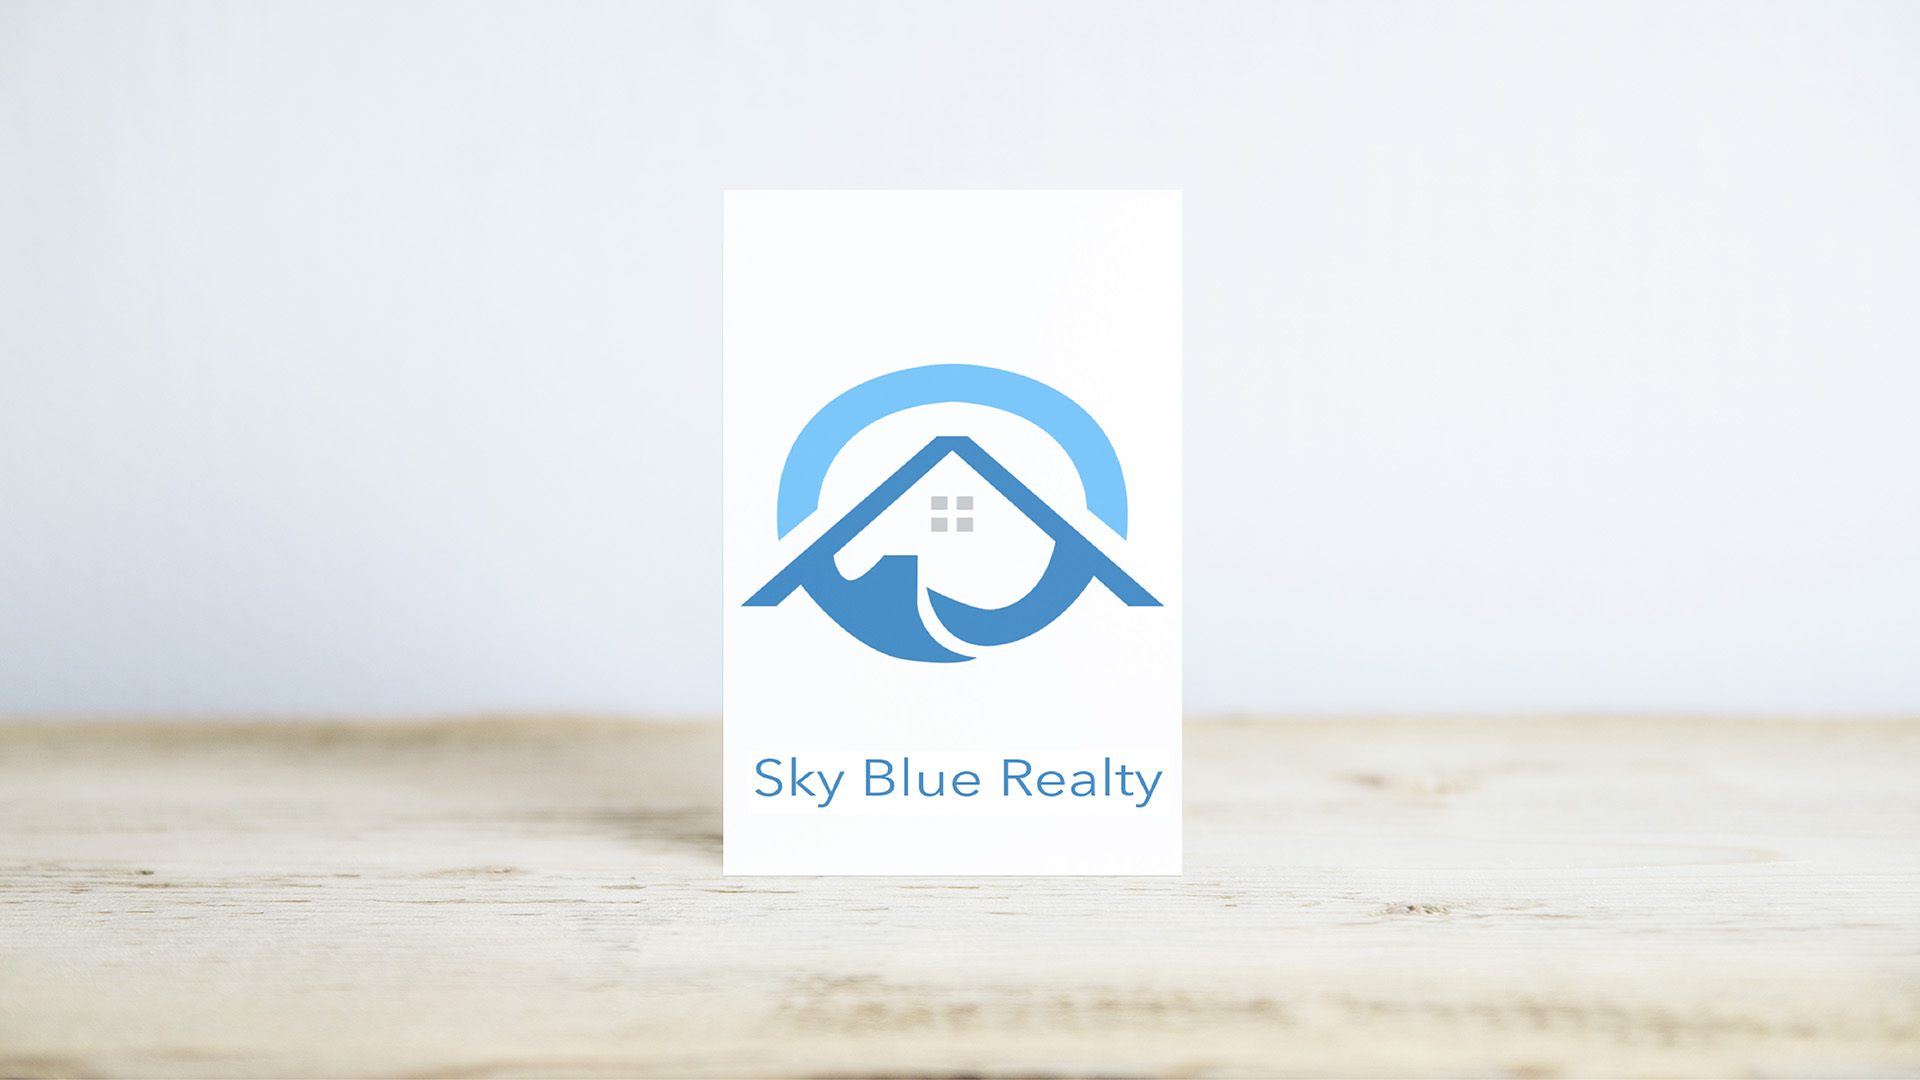  Sky Blue Realty  / I made the logo for the company Sky Blue Realty during my internship with them